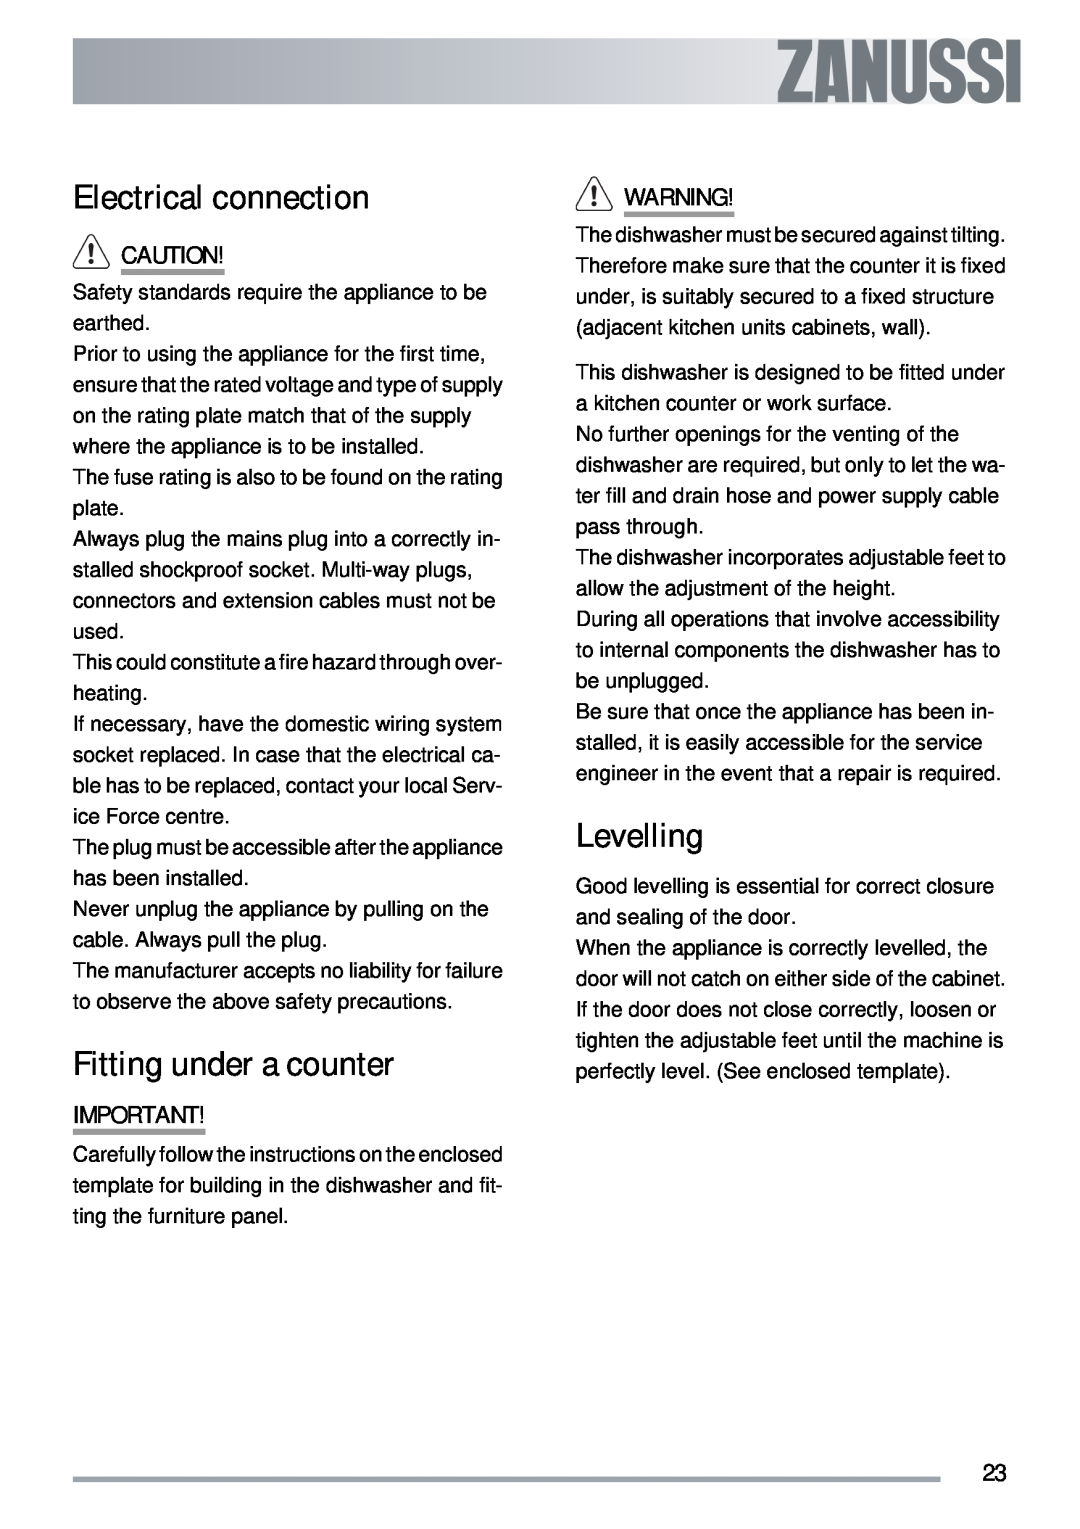 Zanussi ZDI 122 user manual Electrical connection, Fitting under a counter, Levelling 